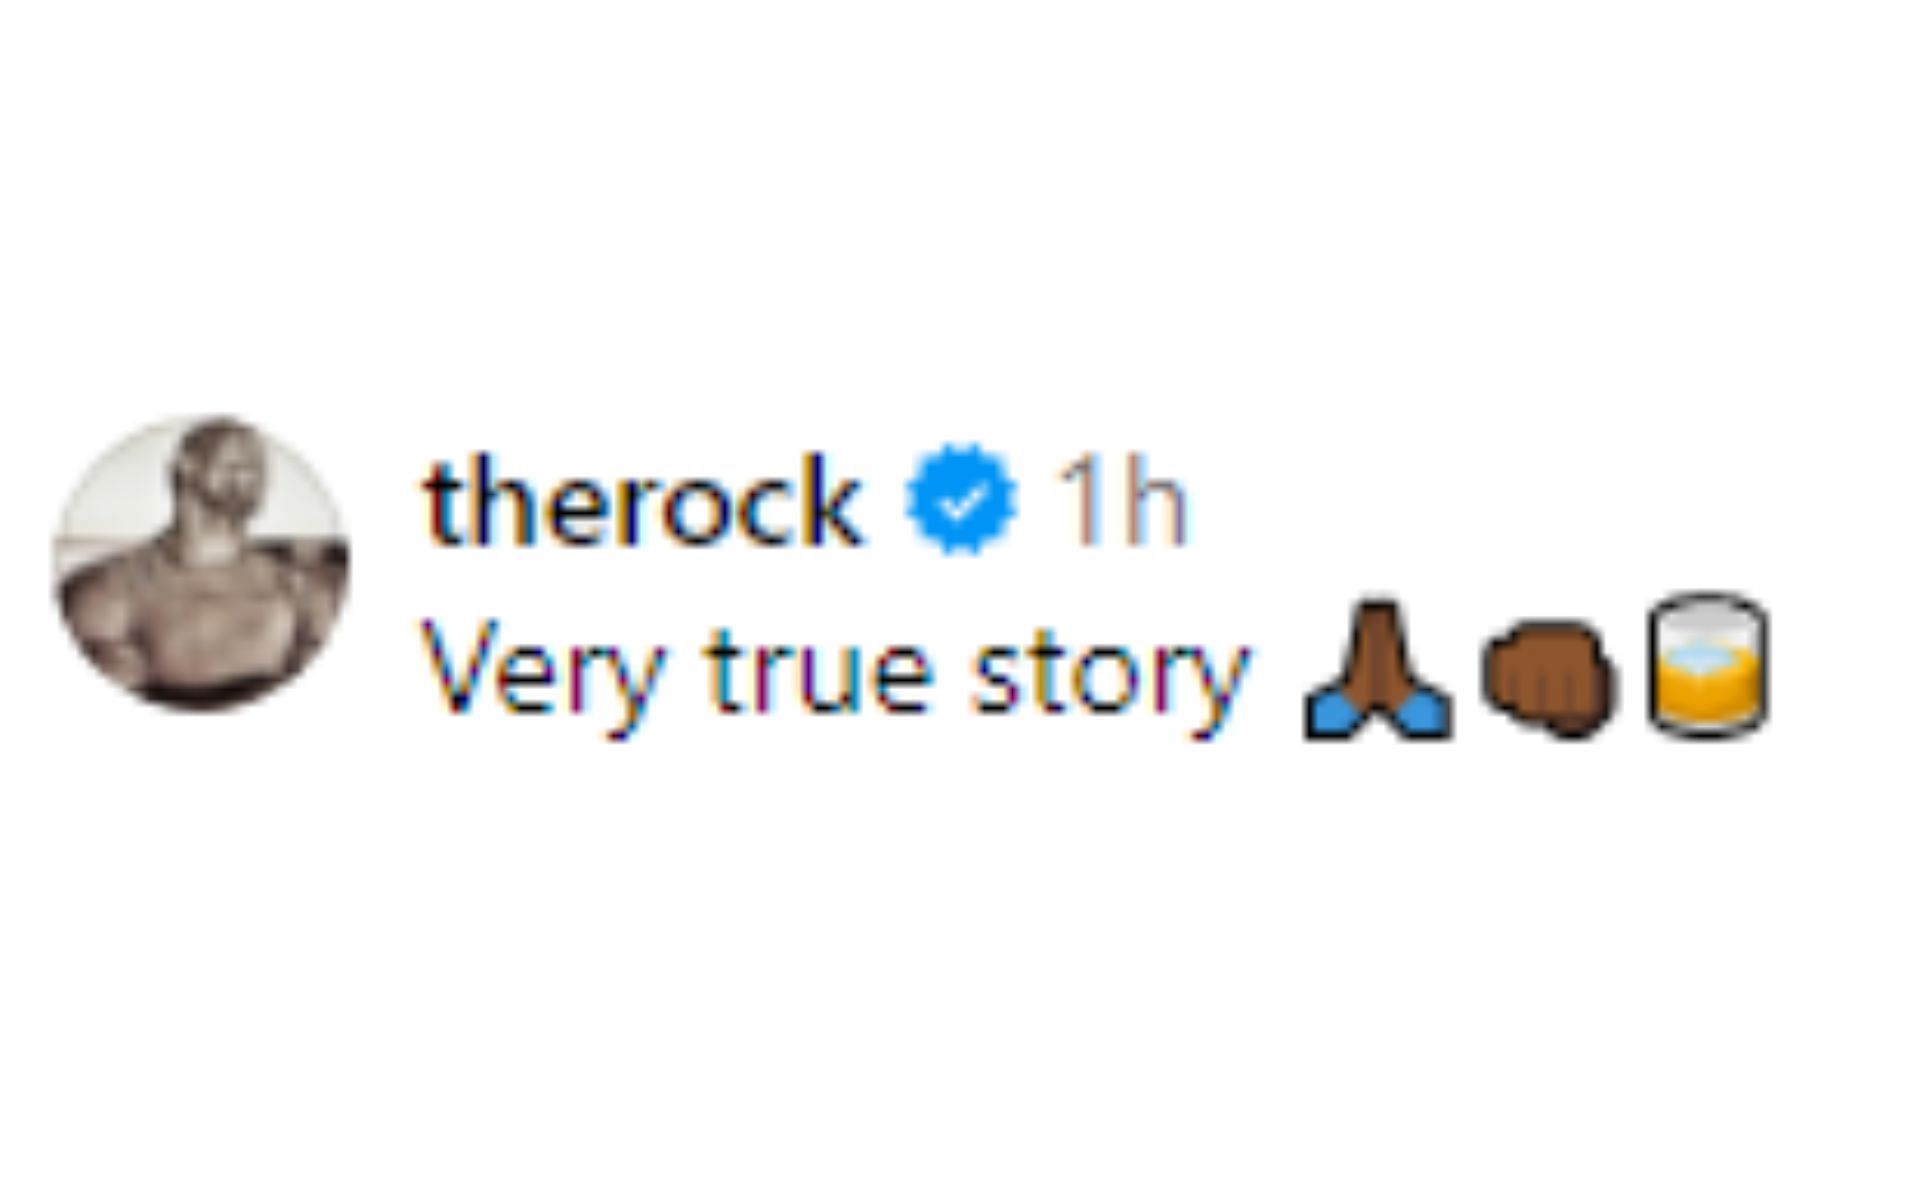 The Rock comments confirming the story